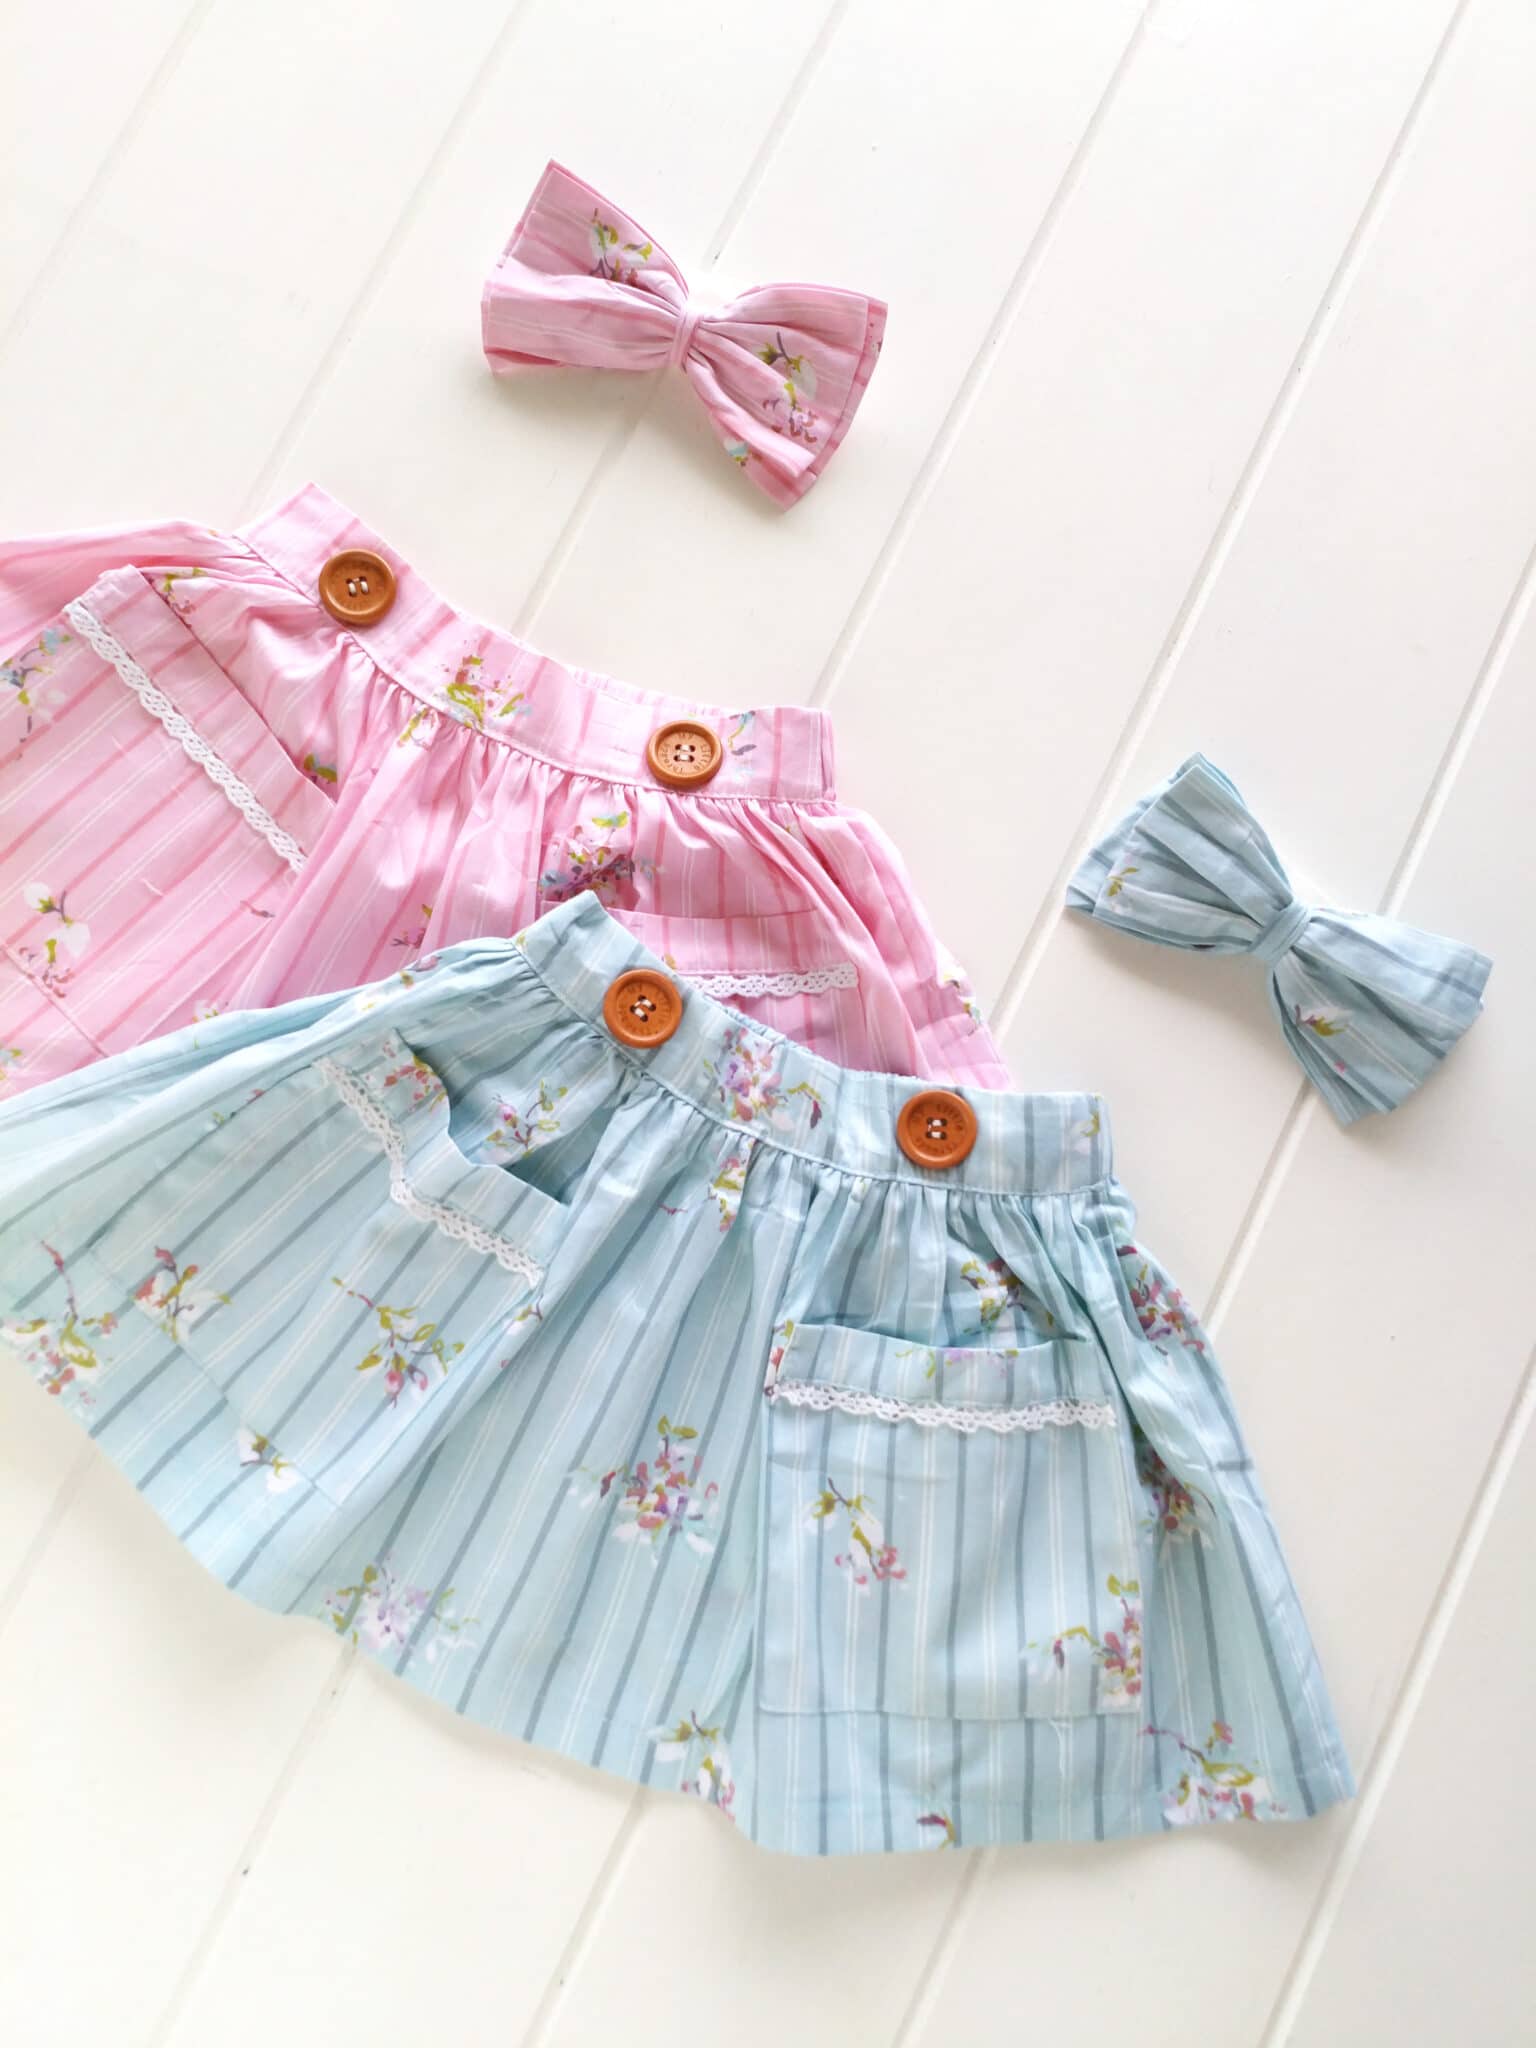 2 skirts for $10 pink and blue skirts